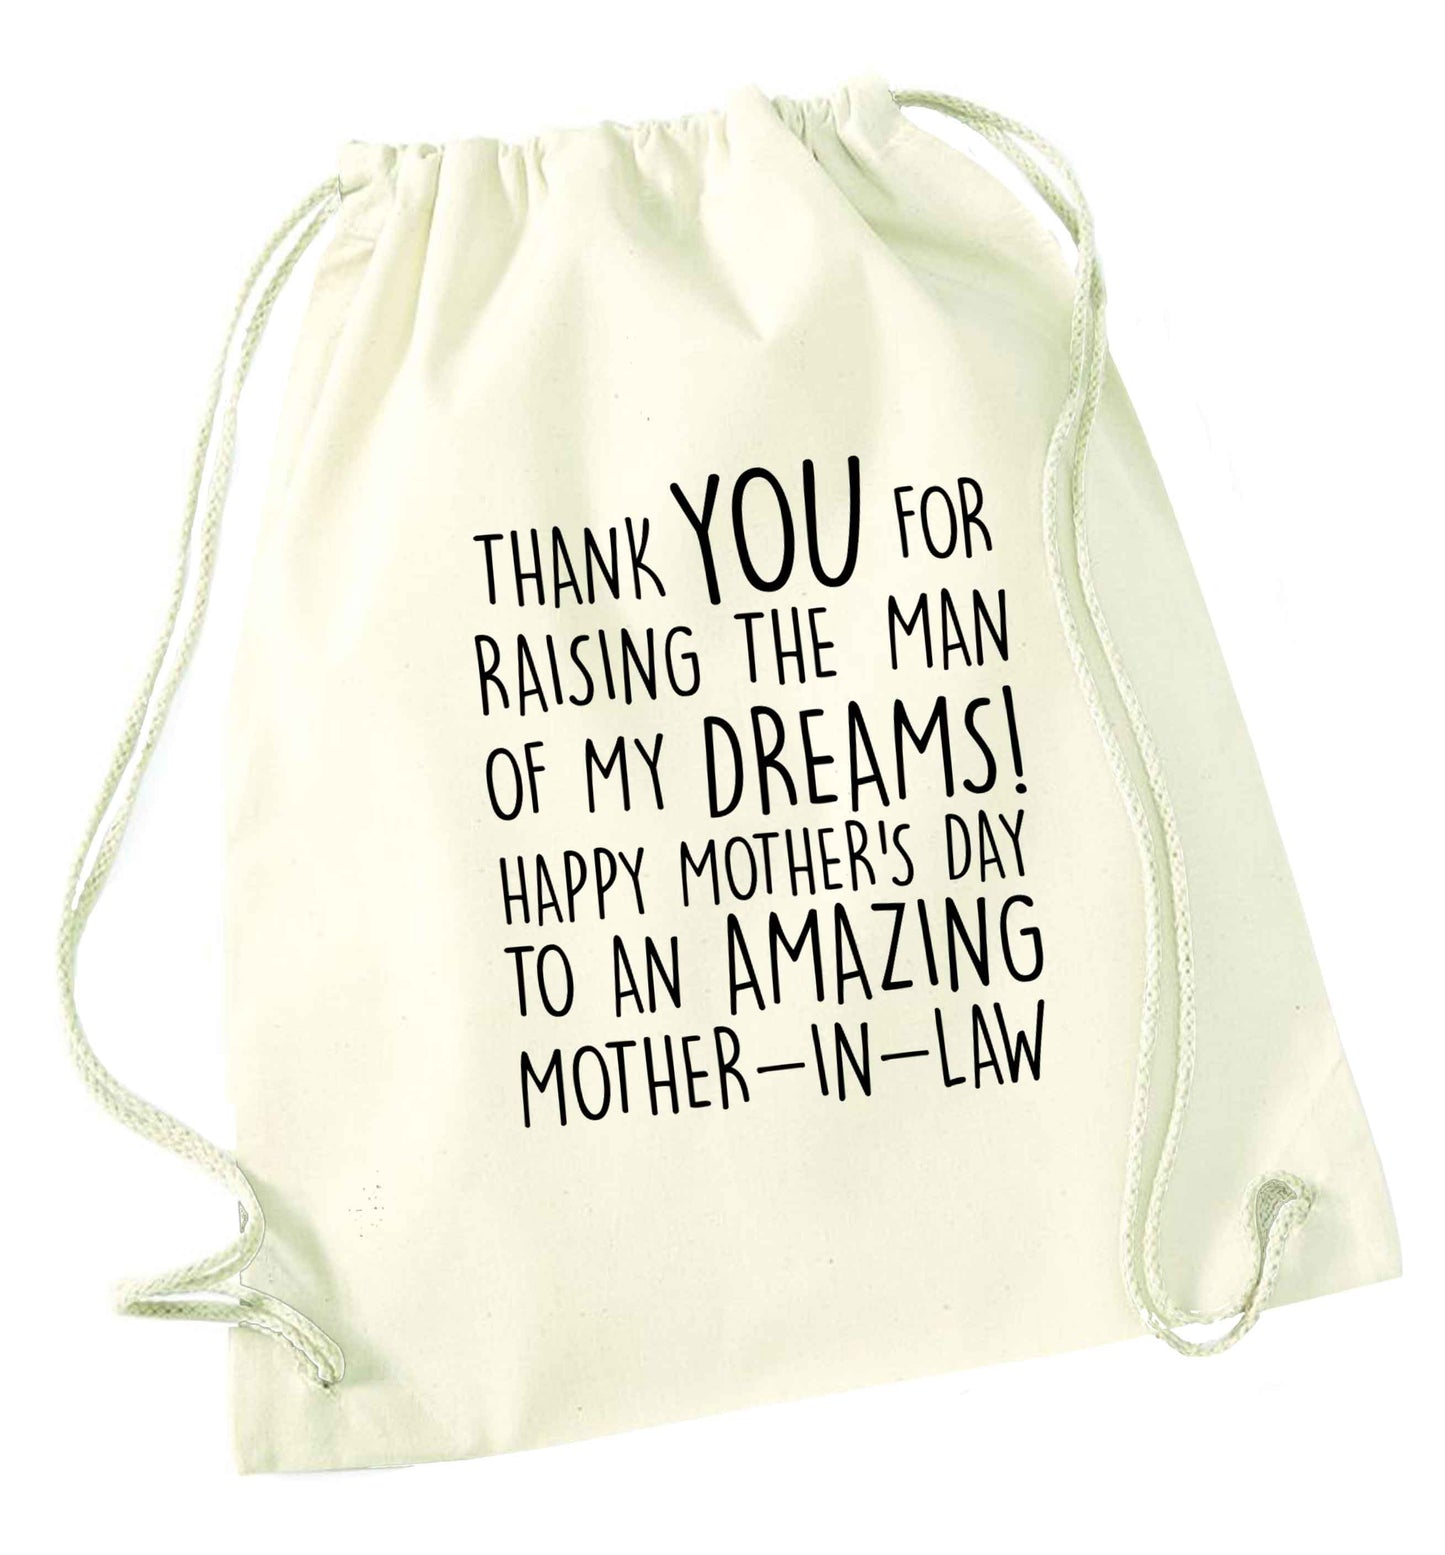 Raising the man of my dreams mother's day mother-in-law natural drawstring bag